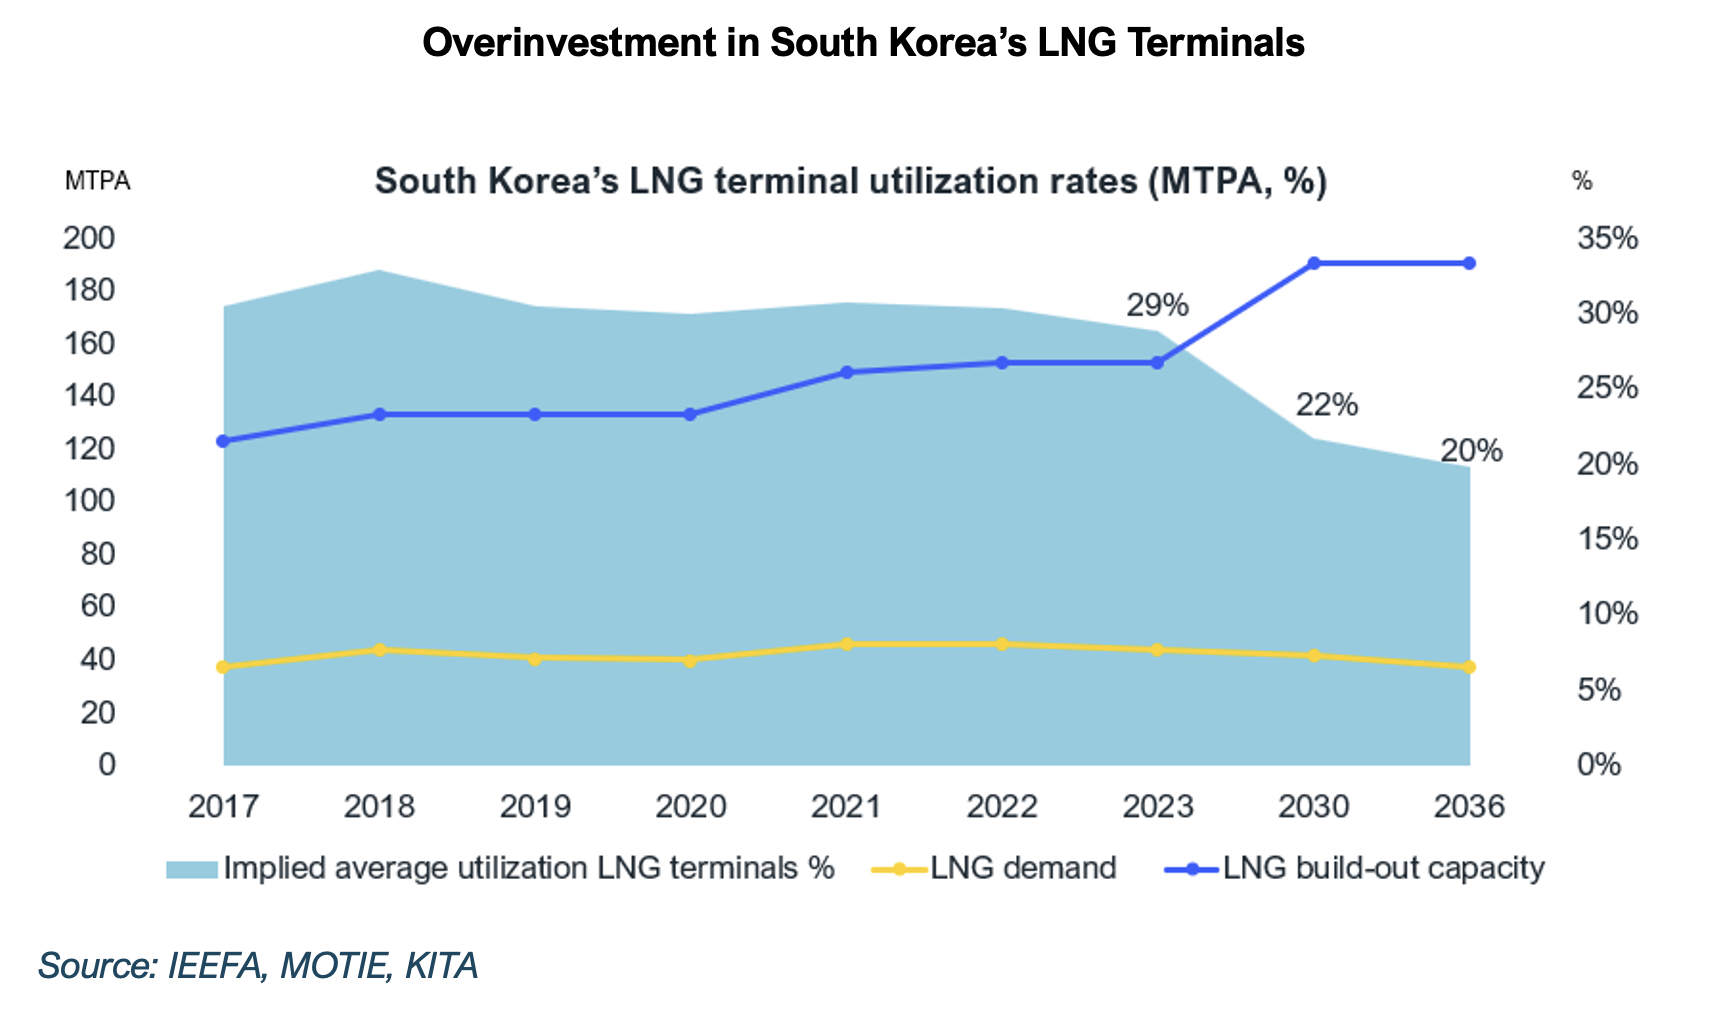 Overinvestment in South Korea's LNG terminals